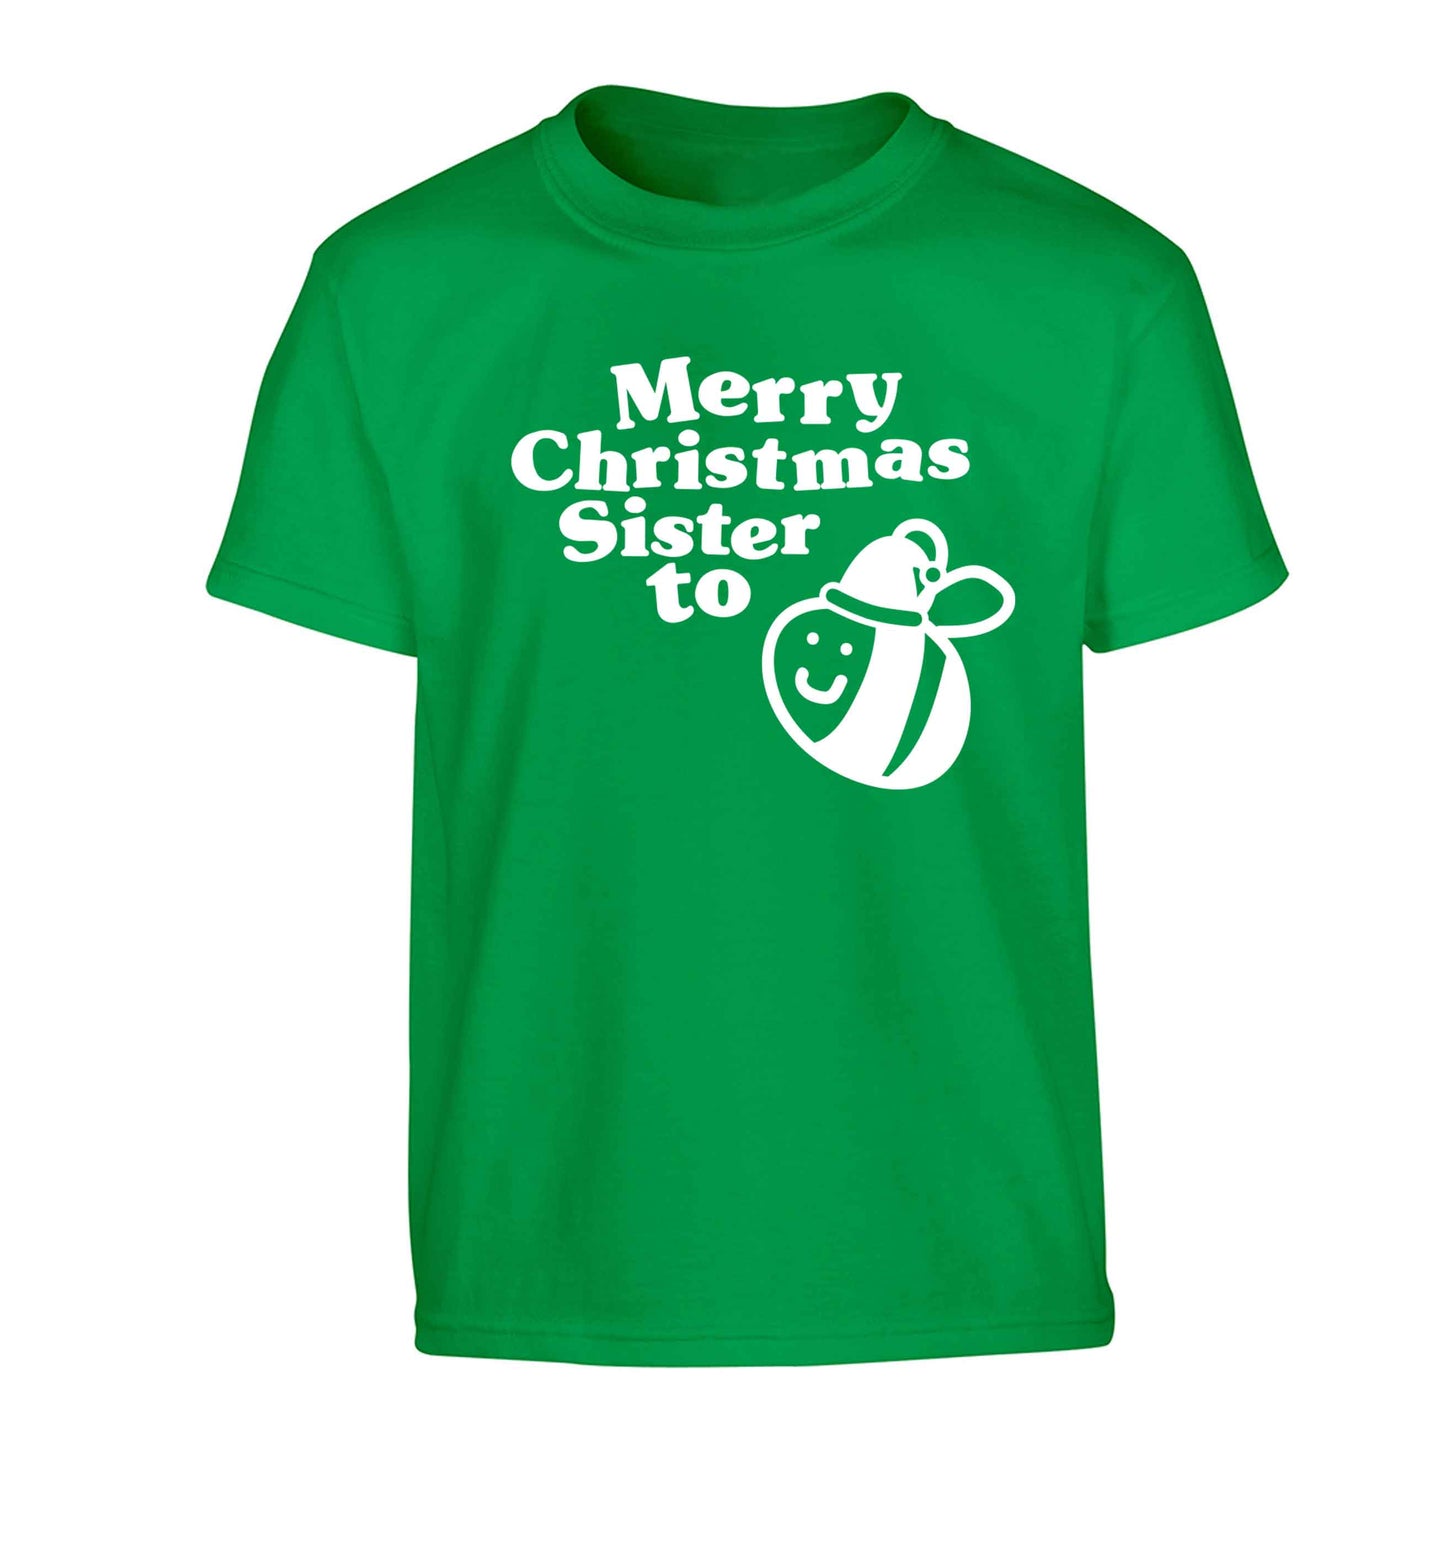 Merry Christmas sister to be Children's green Tshirt 12-13 Years